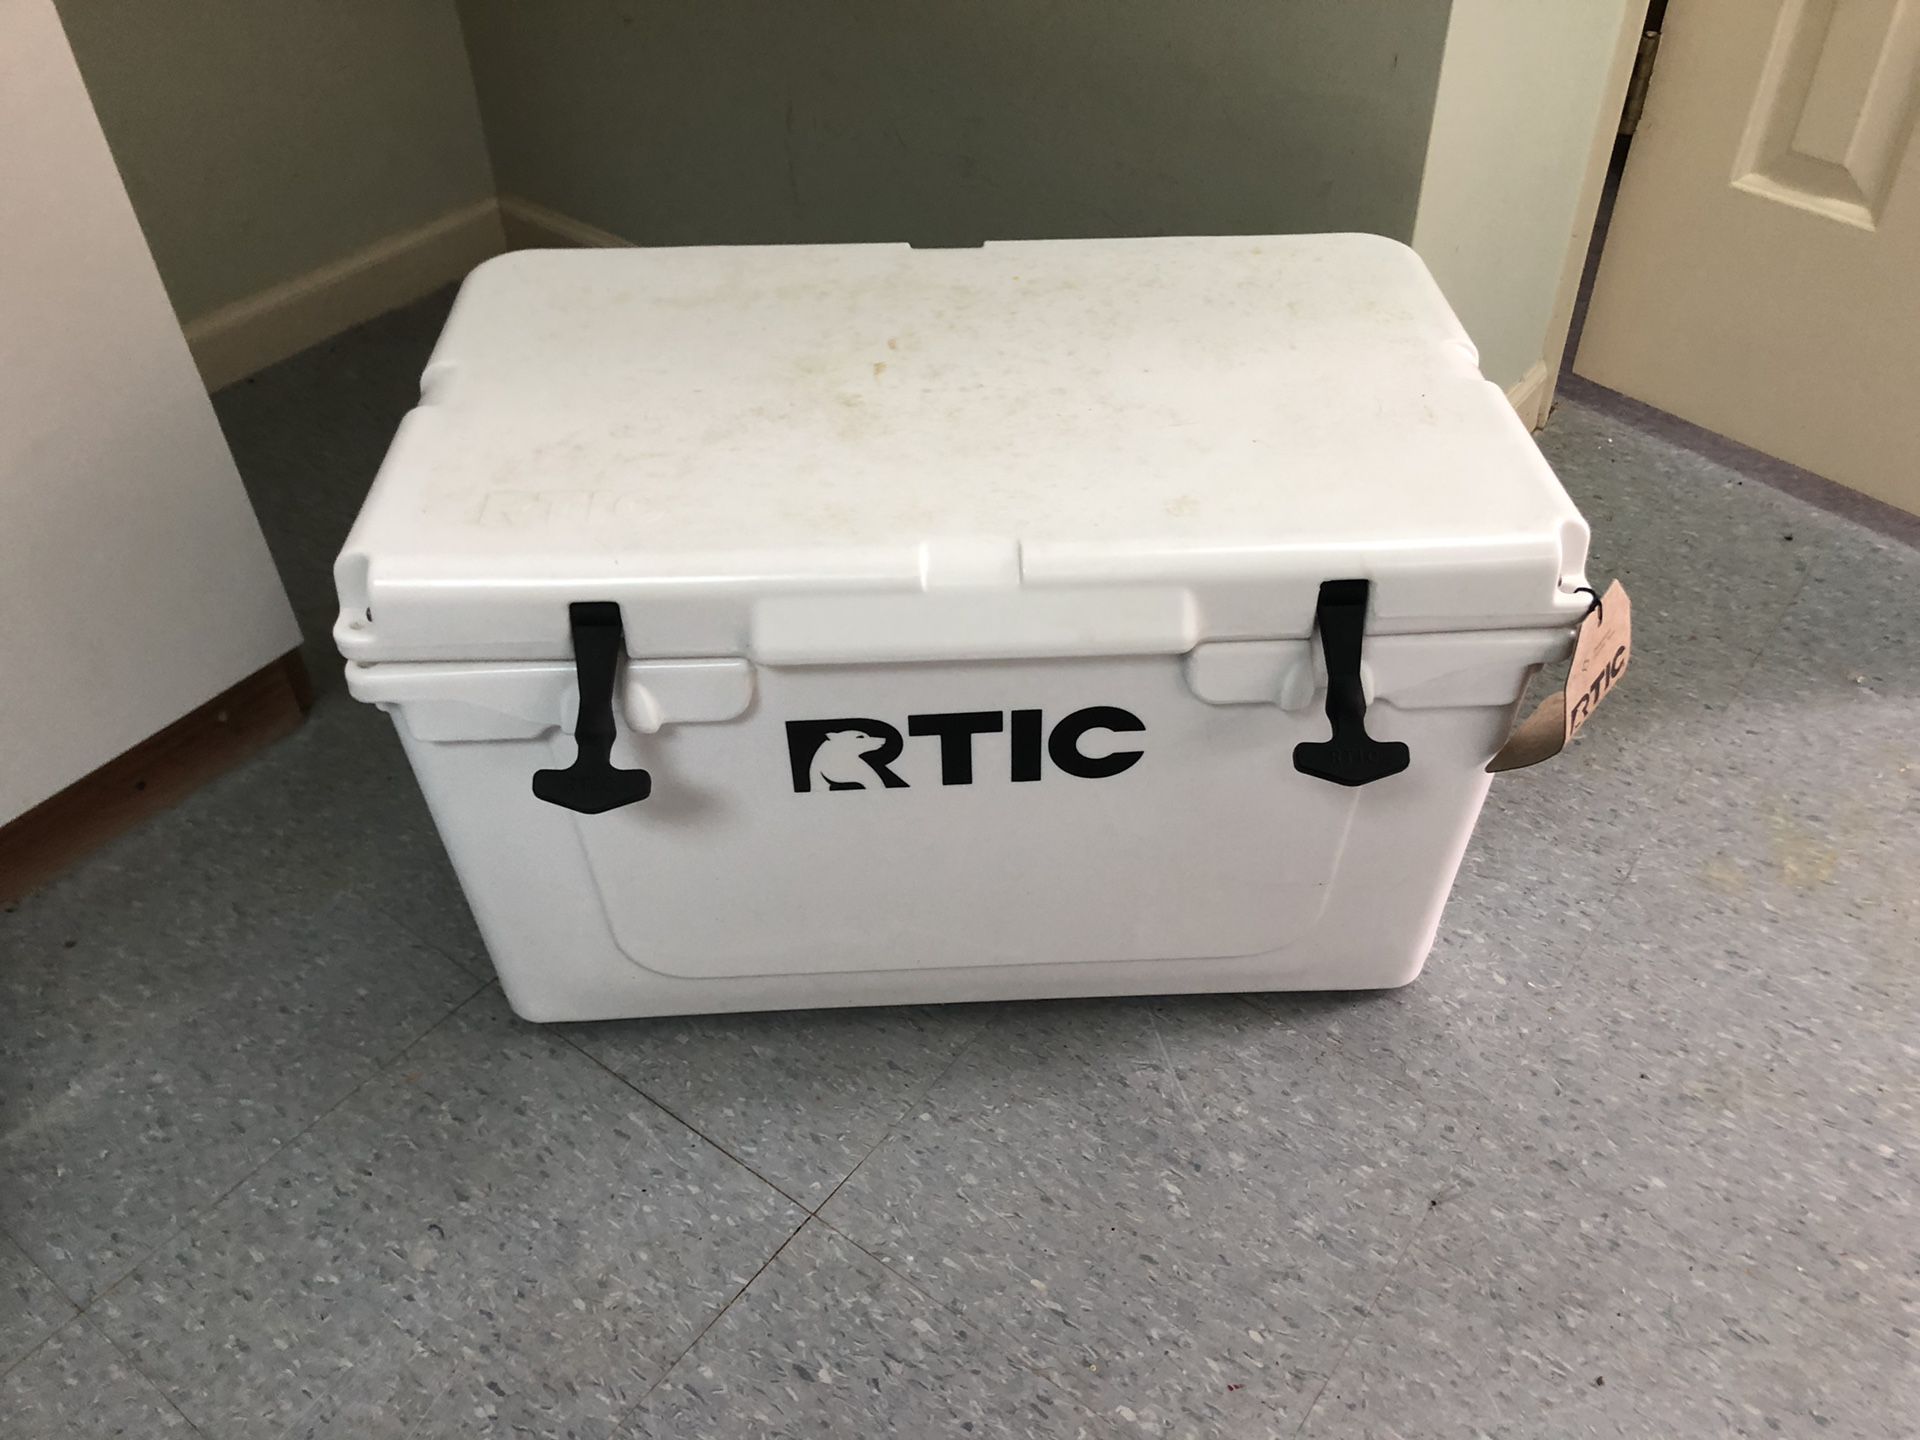 RTIC 45 cooler for Sale in Olympia, WA - OfferUp